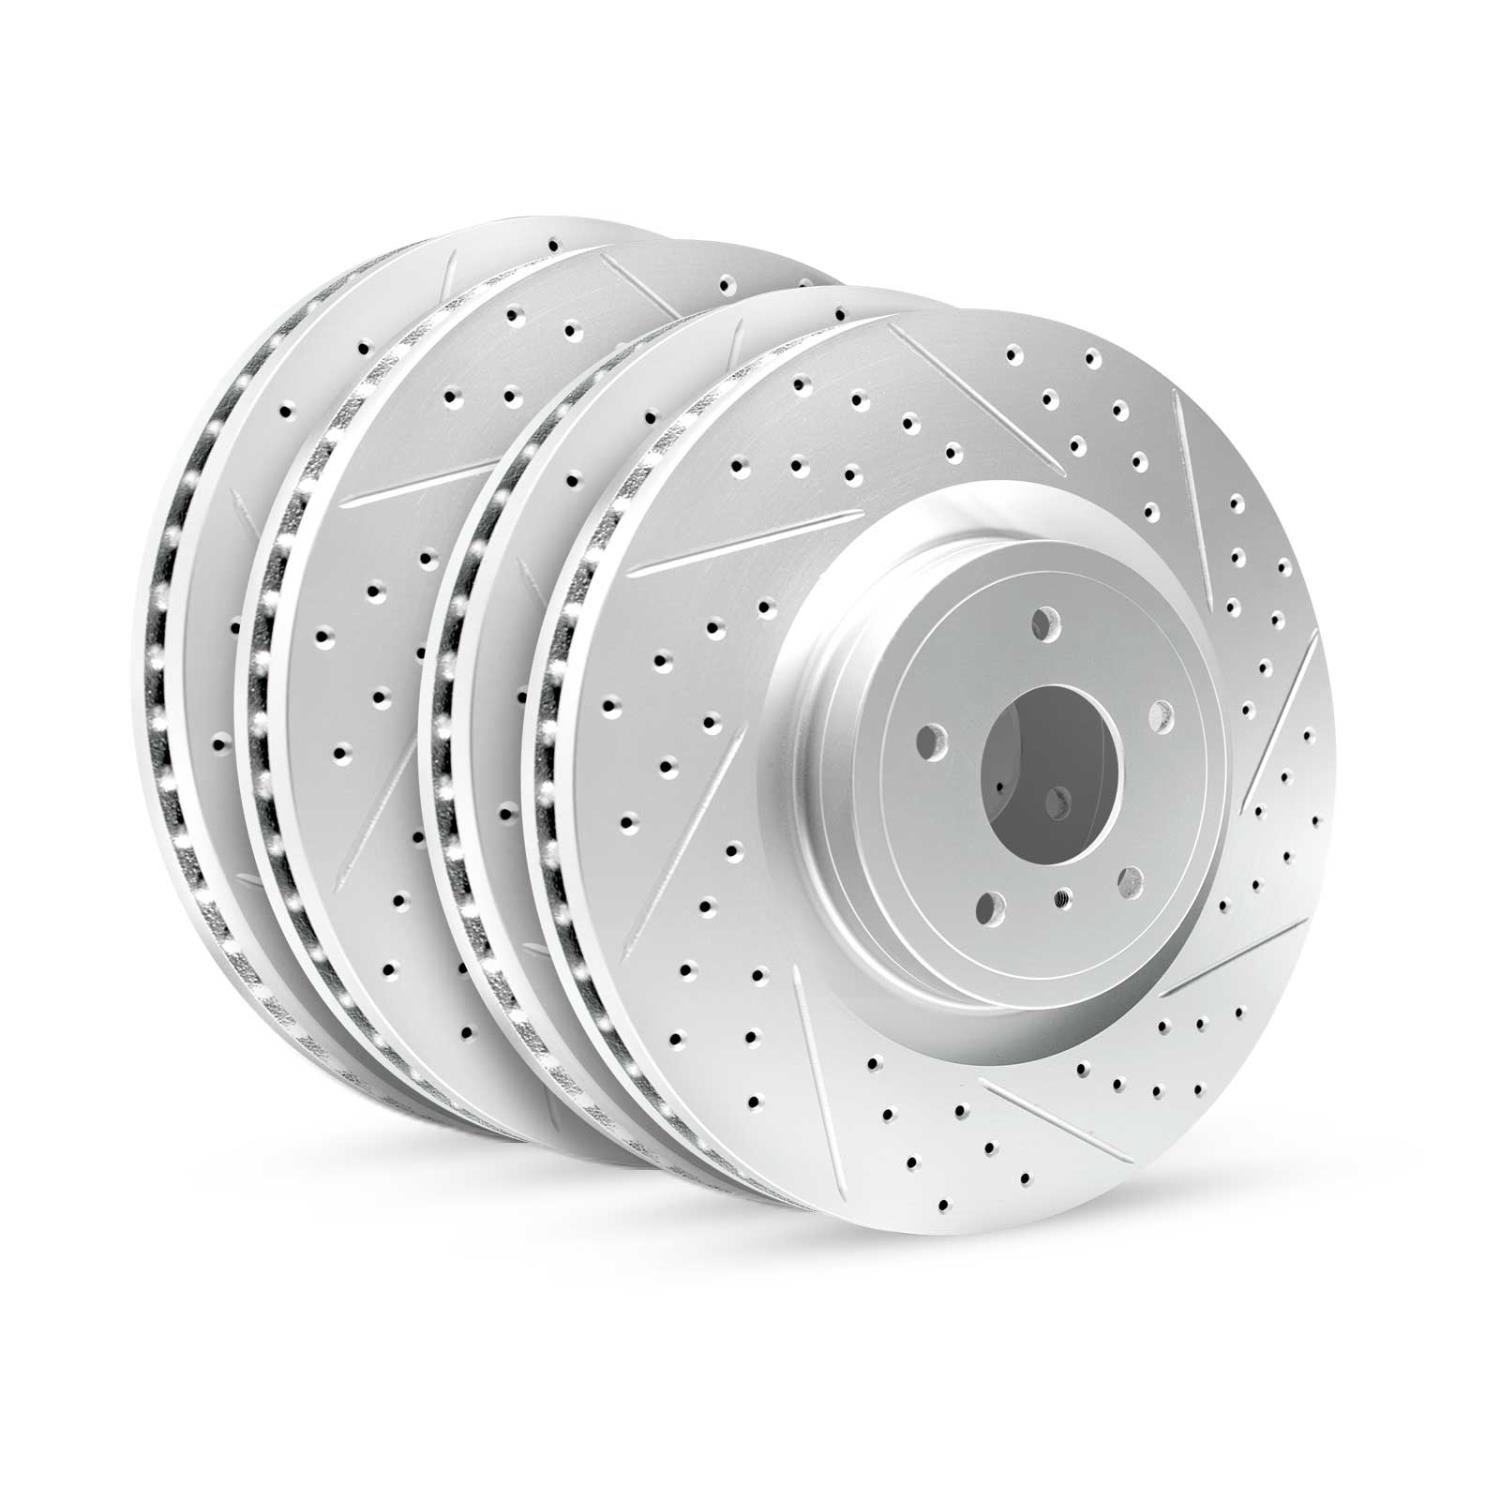 GEO-Carbon Drilled/Slotted Rotors, 2007-2013 Infiniti/Nissan,